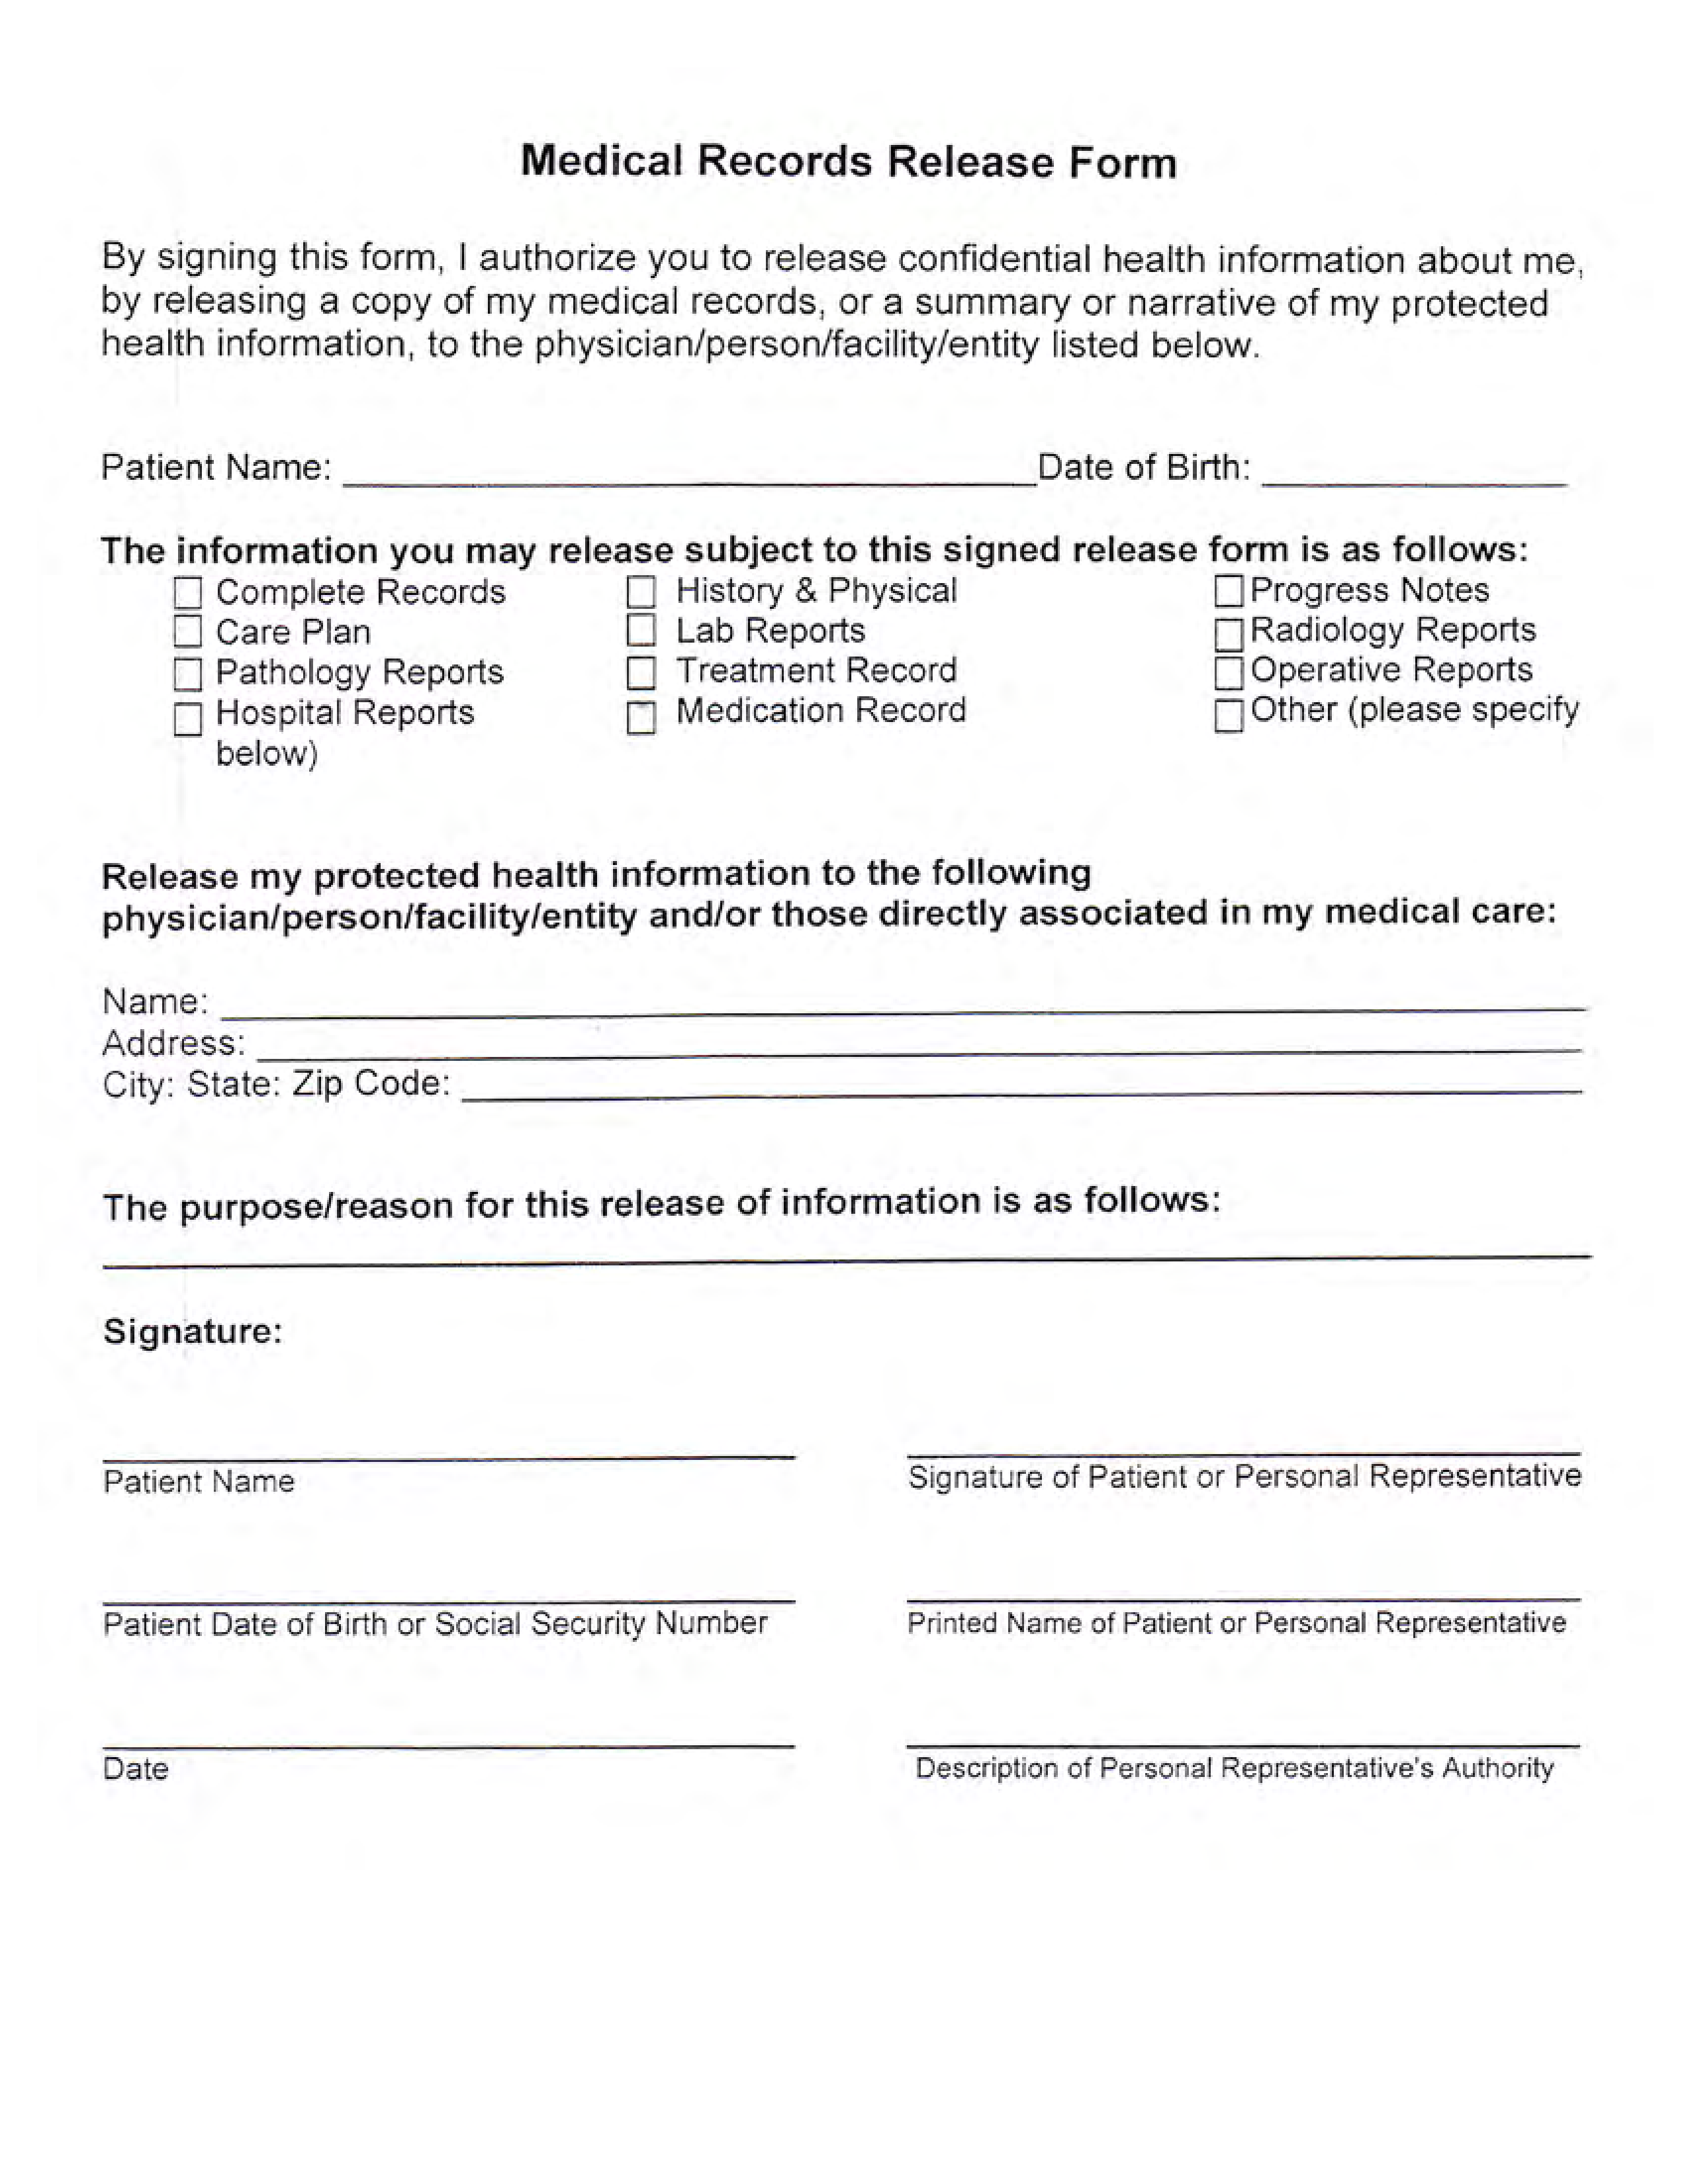 Medical Release Form Template Word 6170